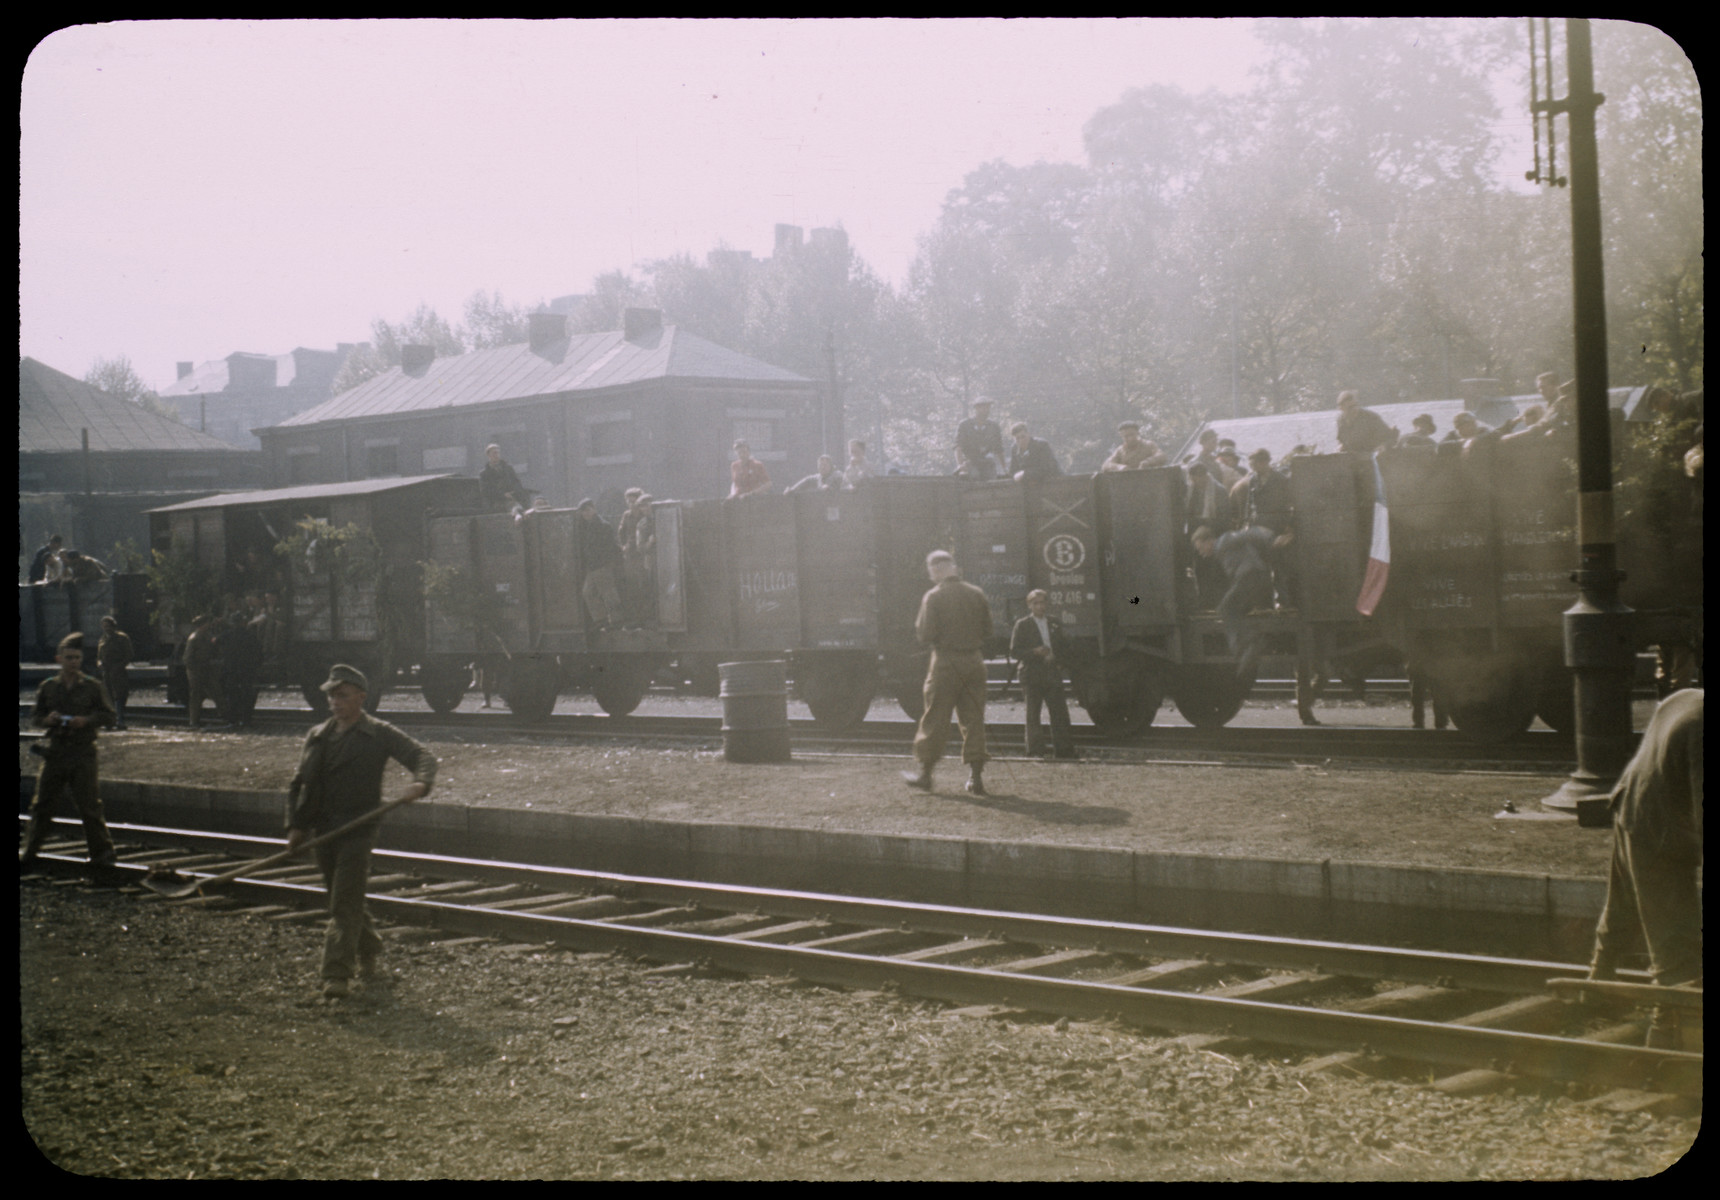 Displaced persons (?) transported by rail car, with military personnel in the foreground.